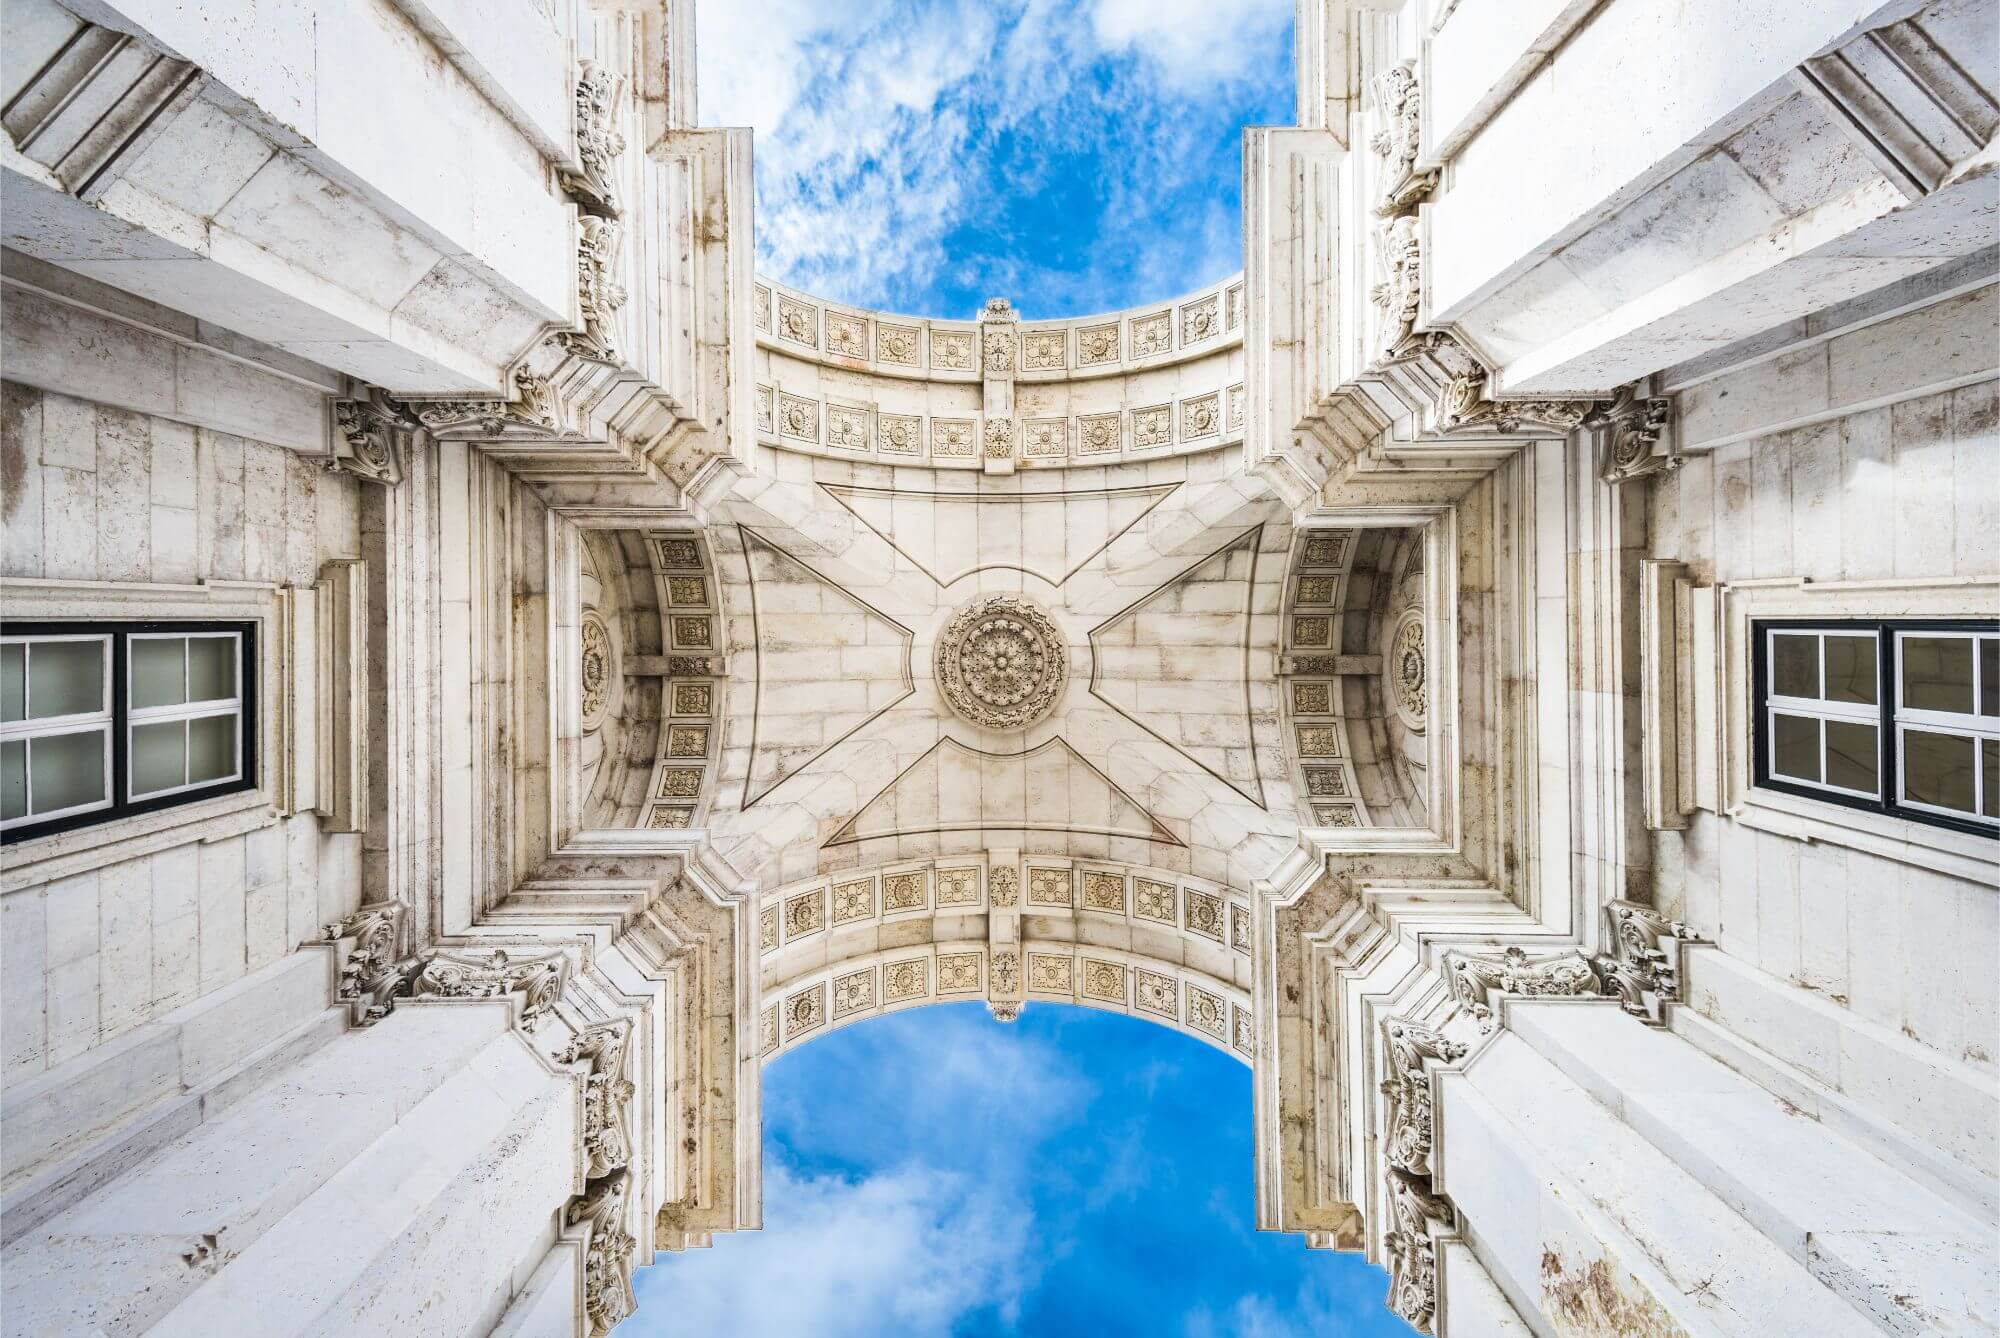 Satisfy your dream of owning property in Europe by investing in one of the region’s most dynamic and affordable cities – the wealthiest city in Portugal and its capital, Lisbon.